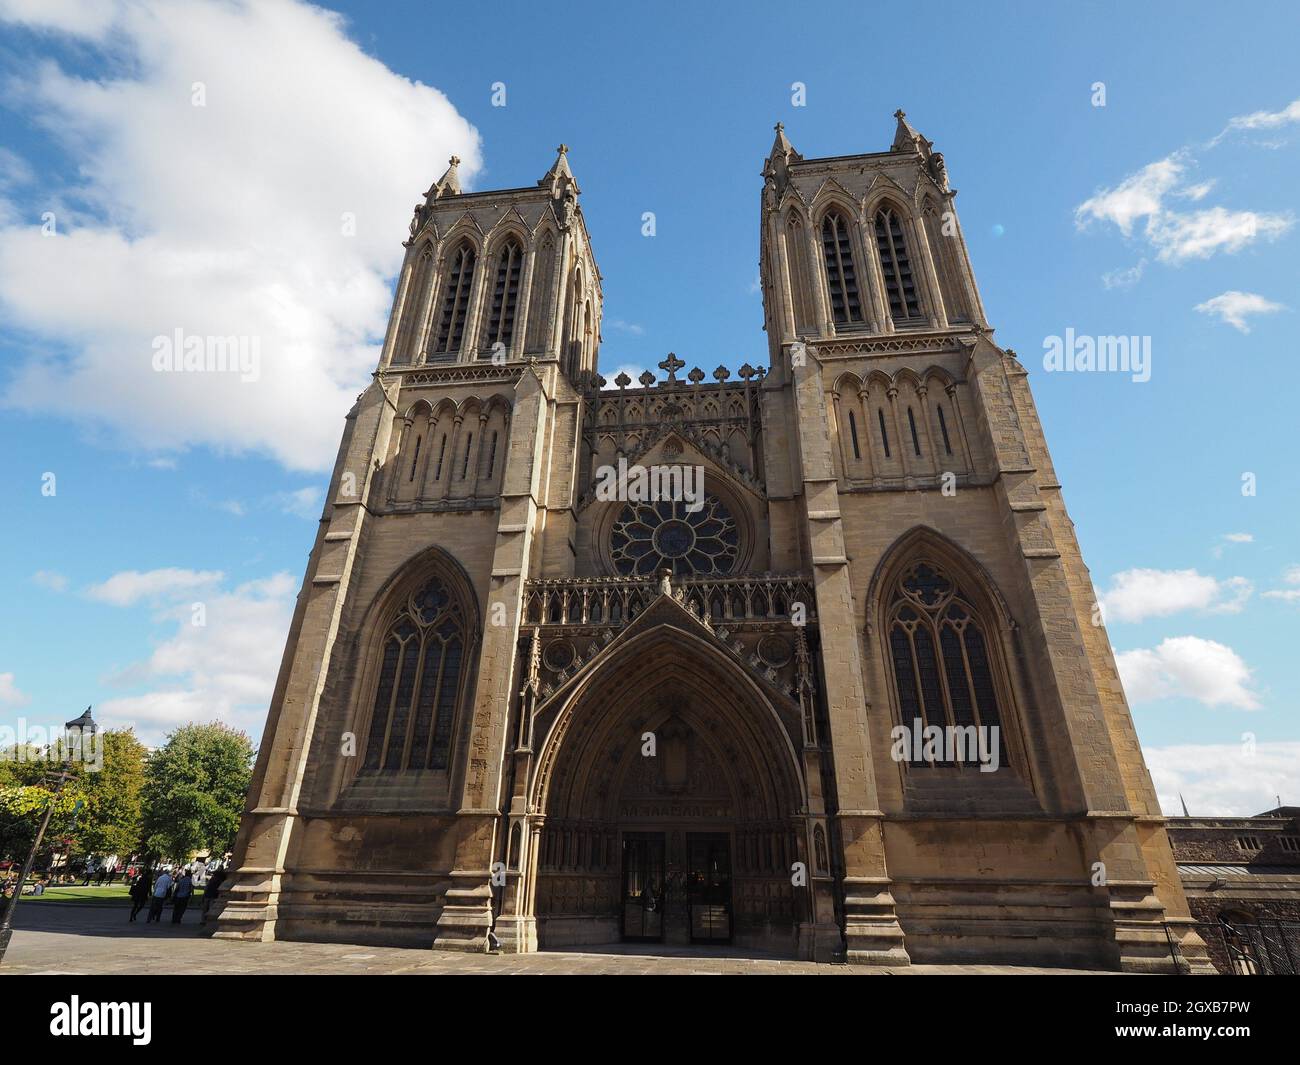 Bristol Cathedral (formally the Cathedral Church of the Holy and Undivided Trinity) in Bristol, UK. Stock Photo